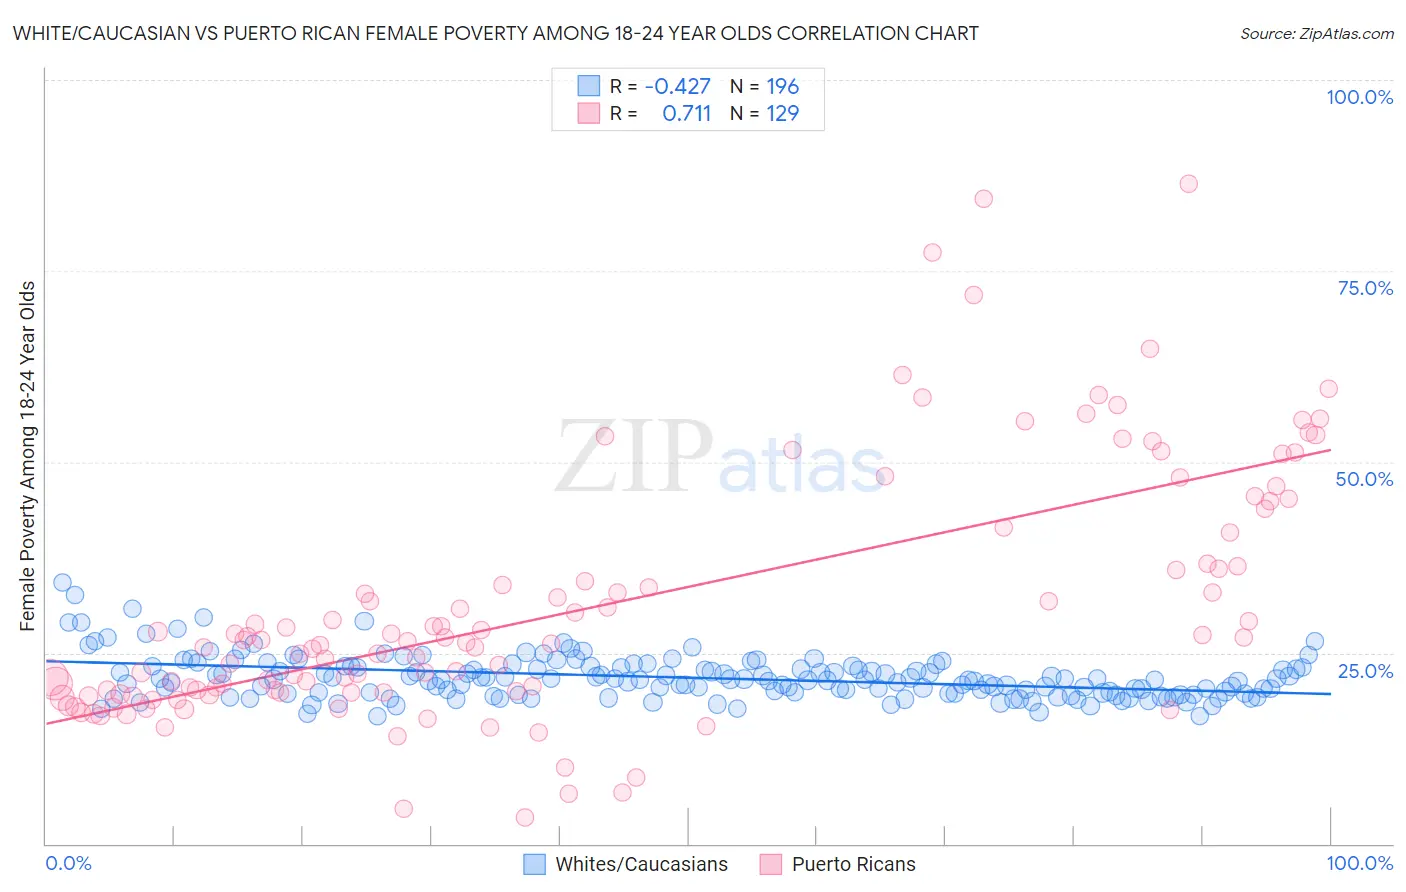 White/Caucasian vs Puerto Rican Female Poverty Among 18-24 Year Olds